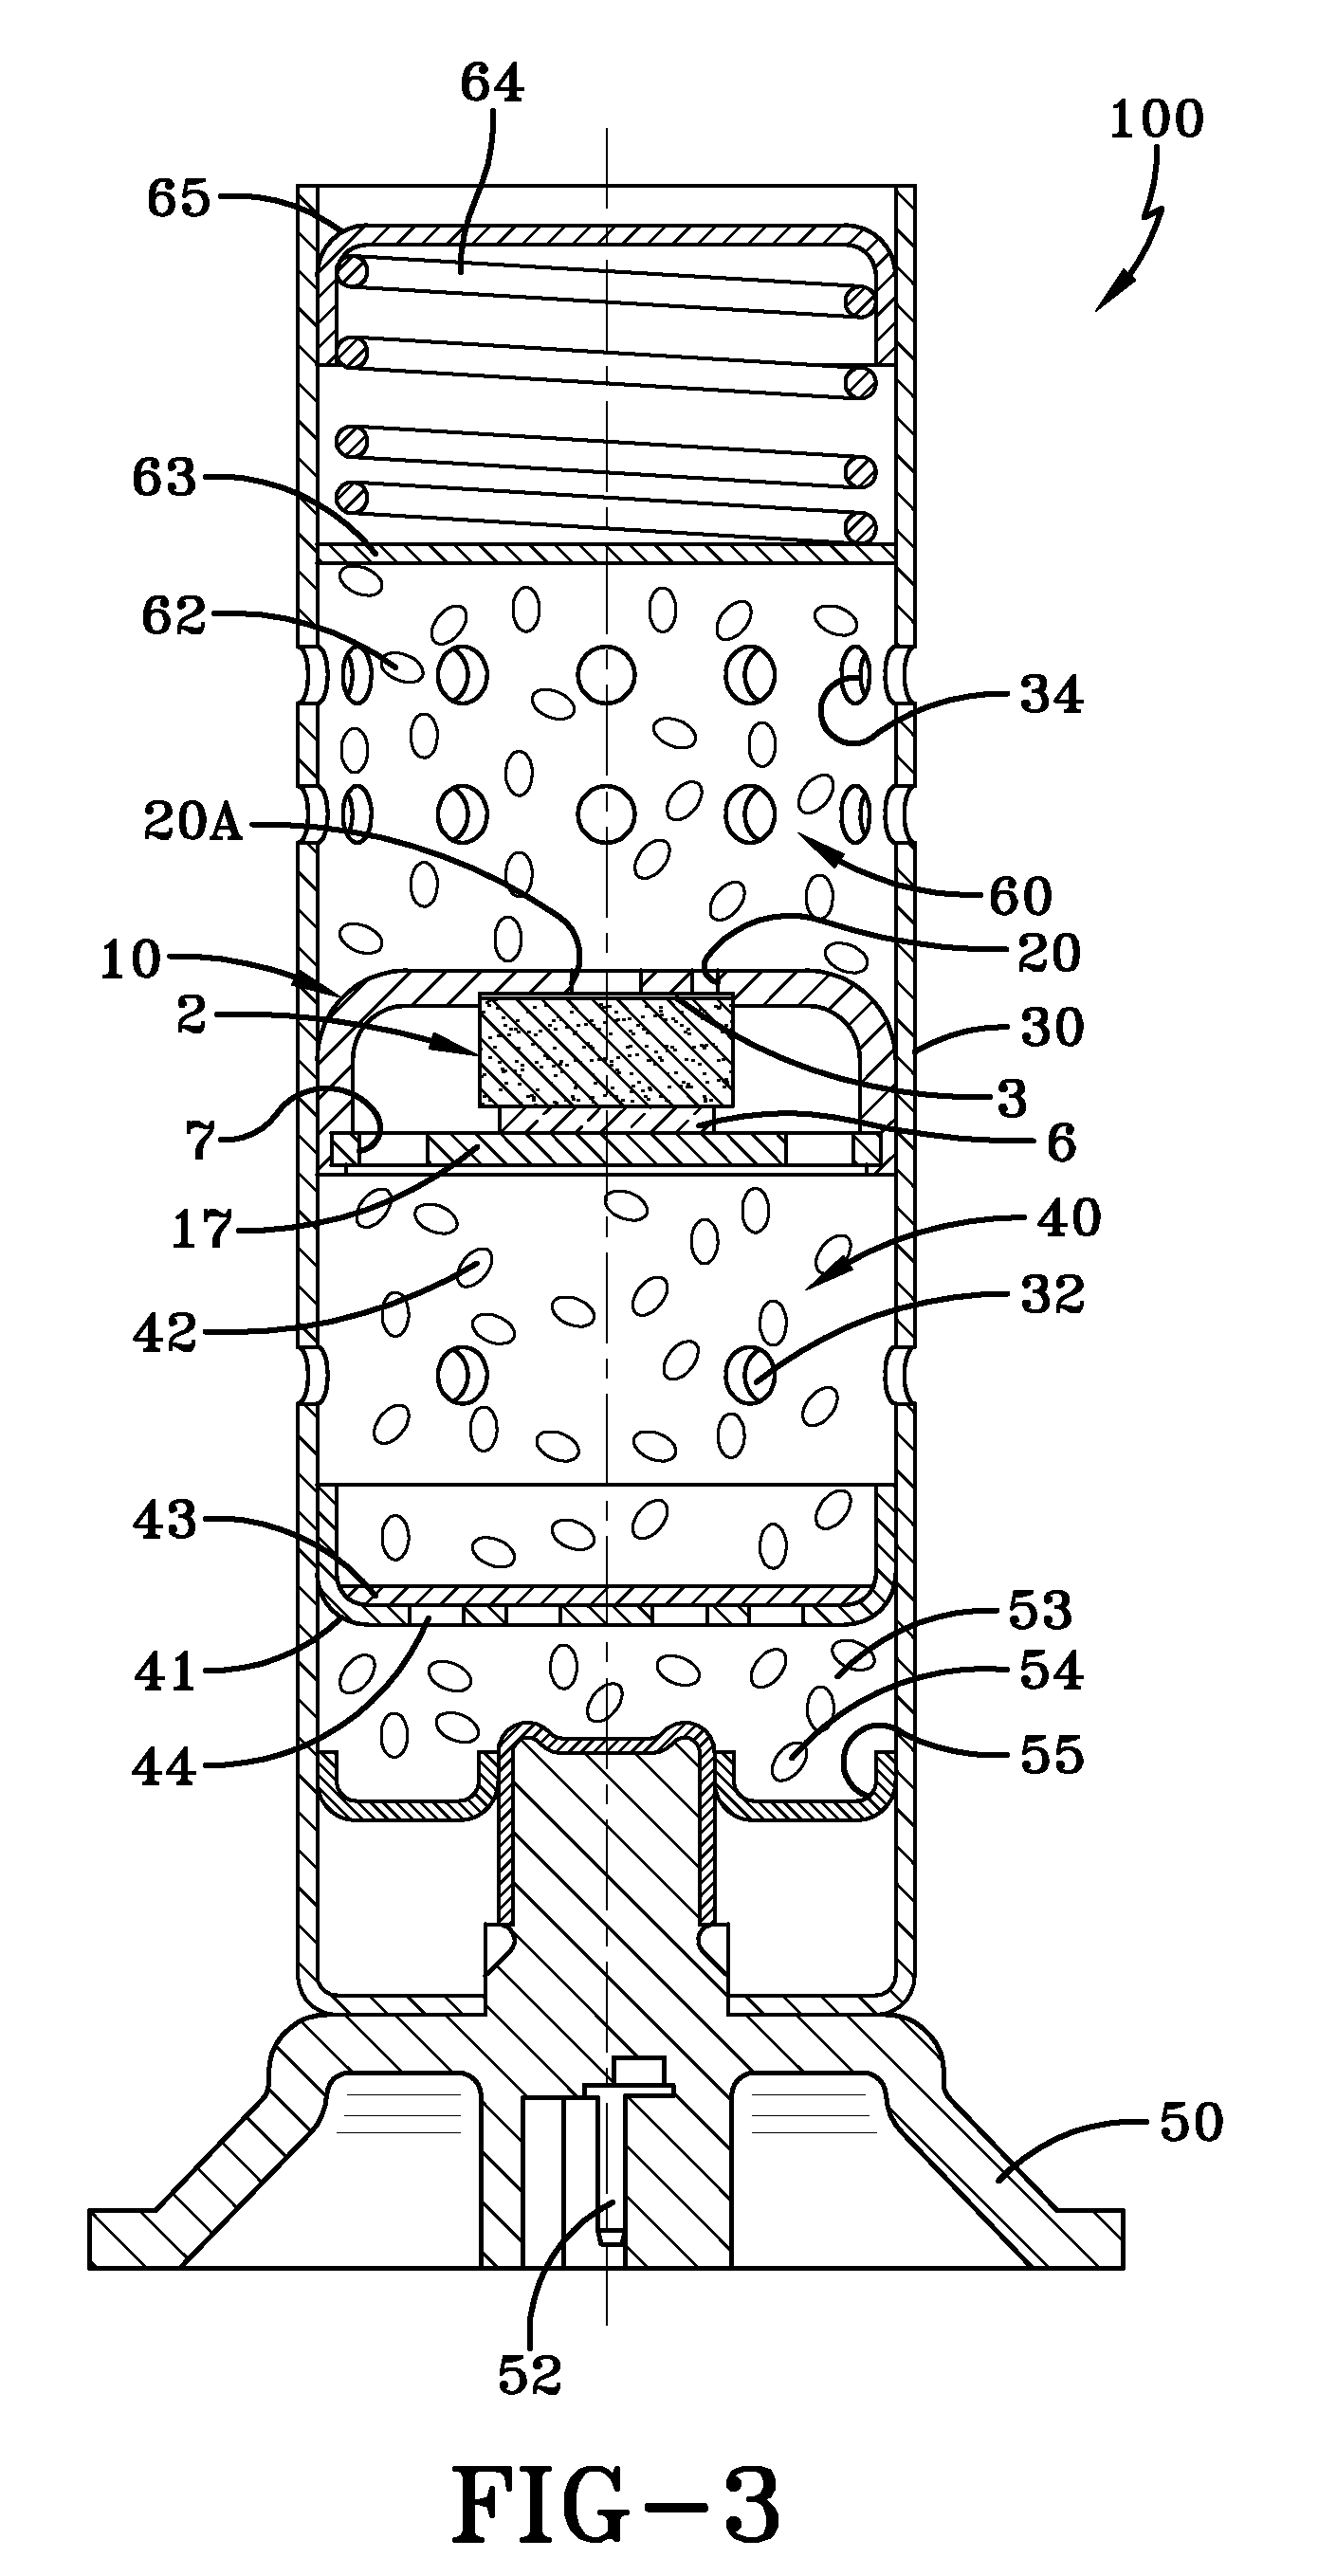 Ignition delay module for an airbag inflator